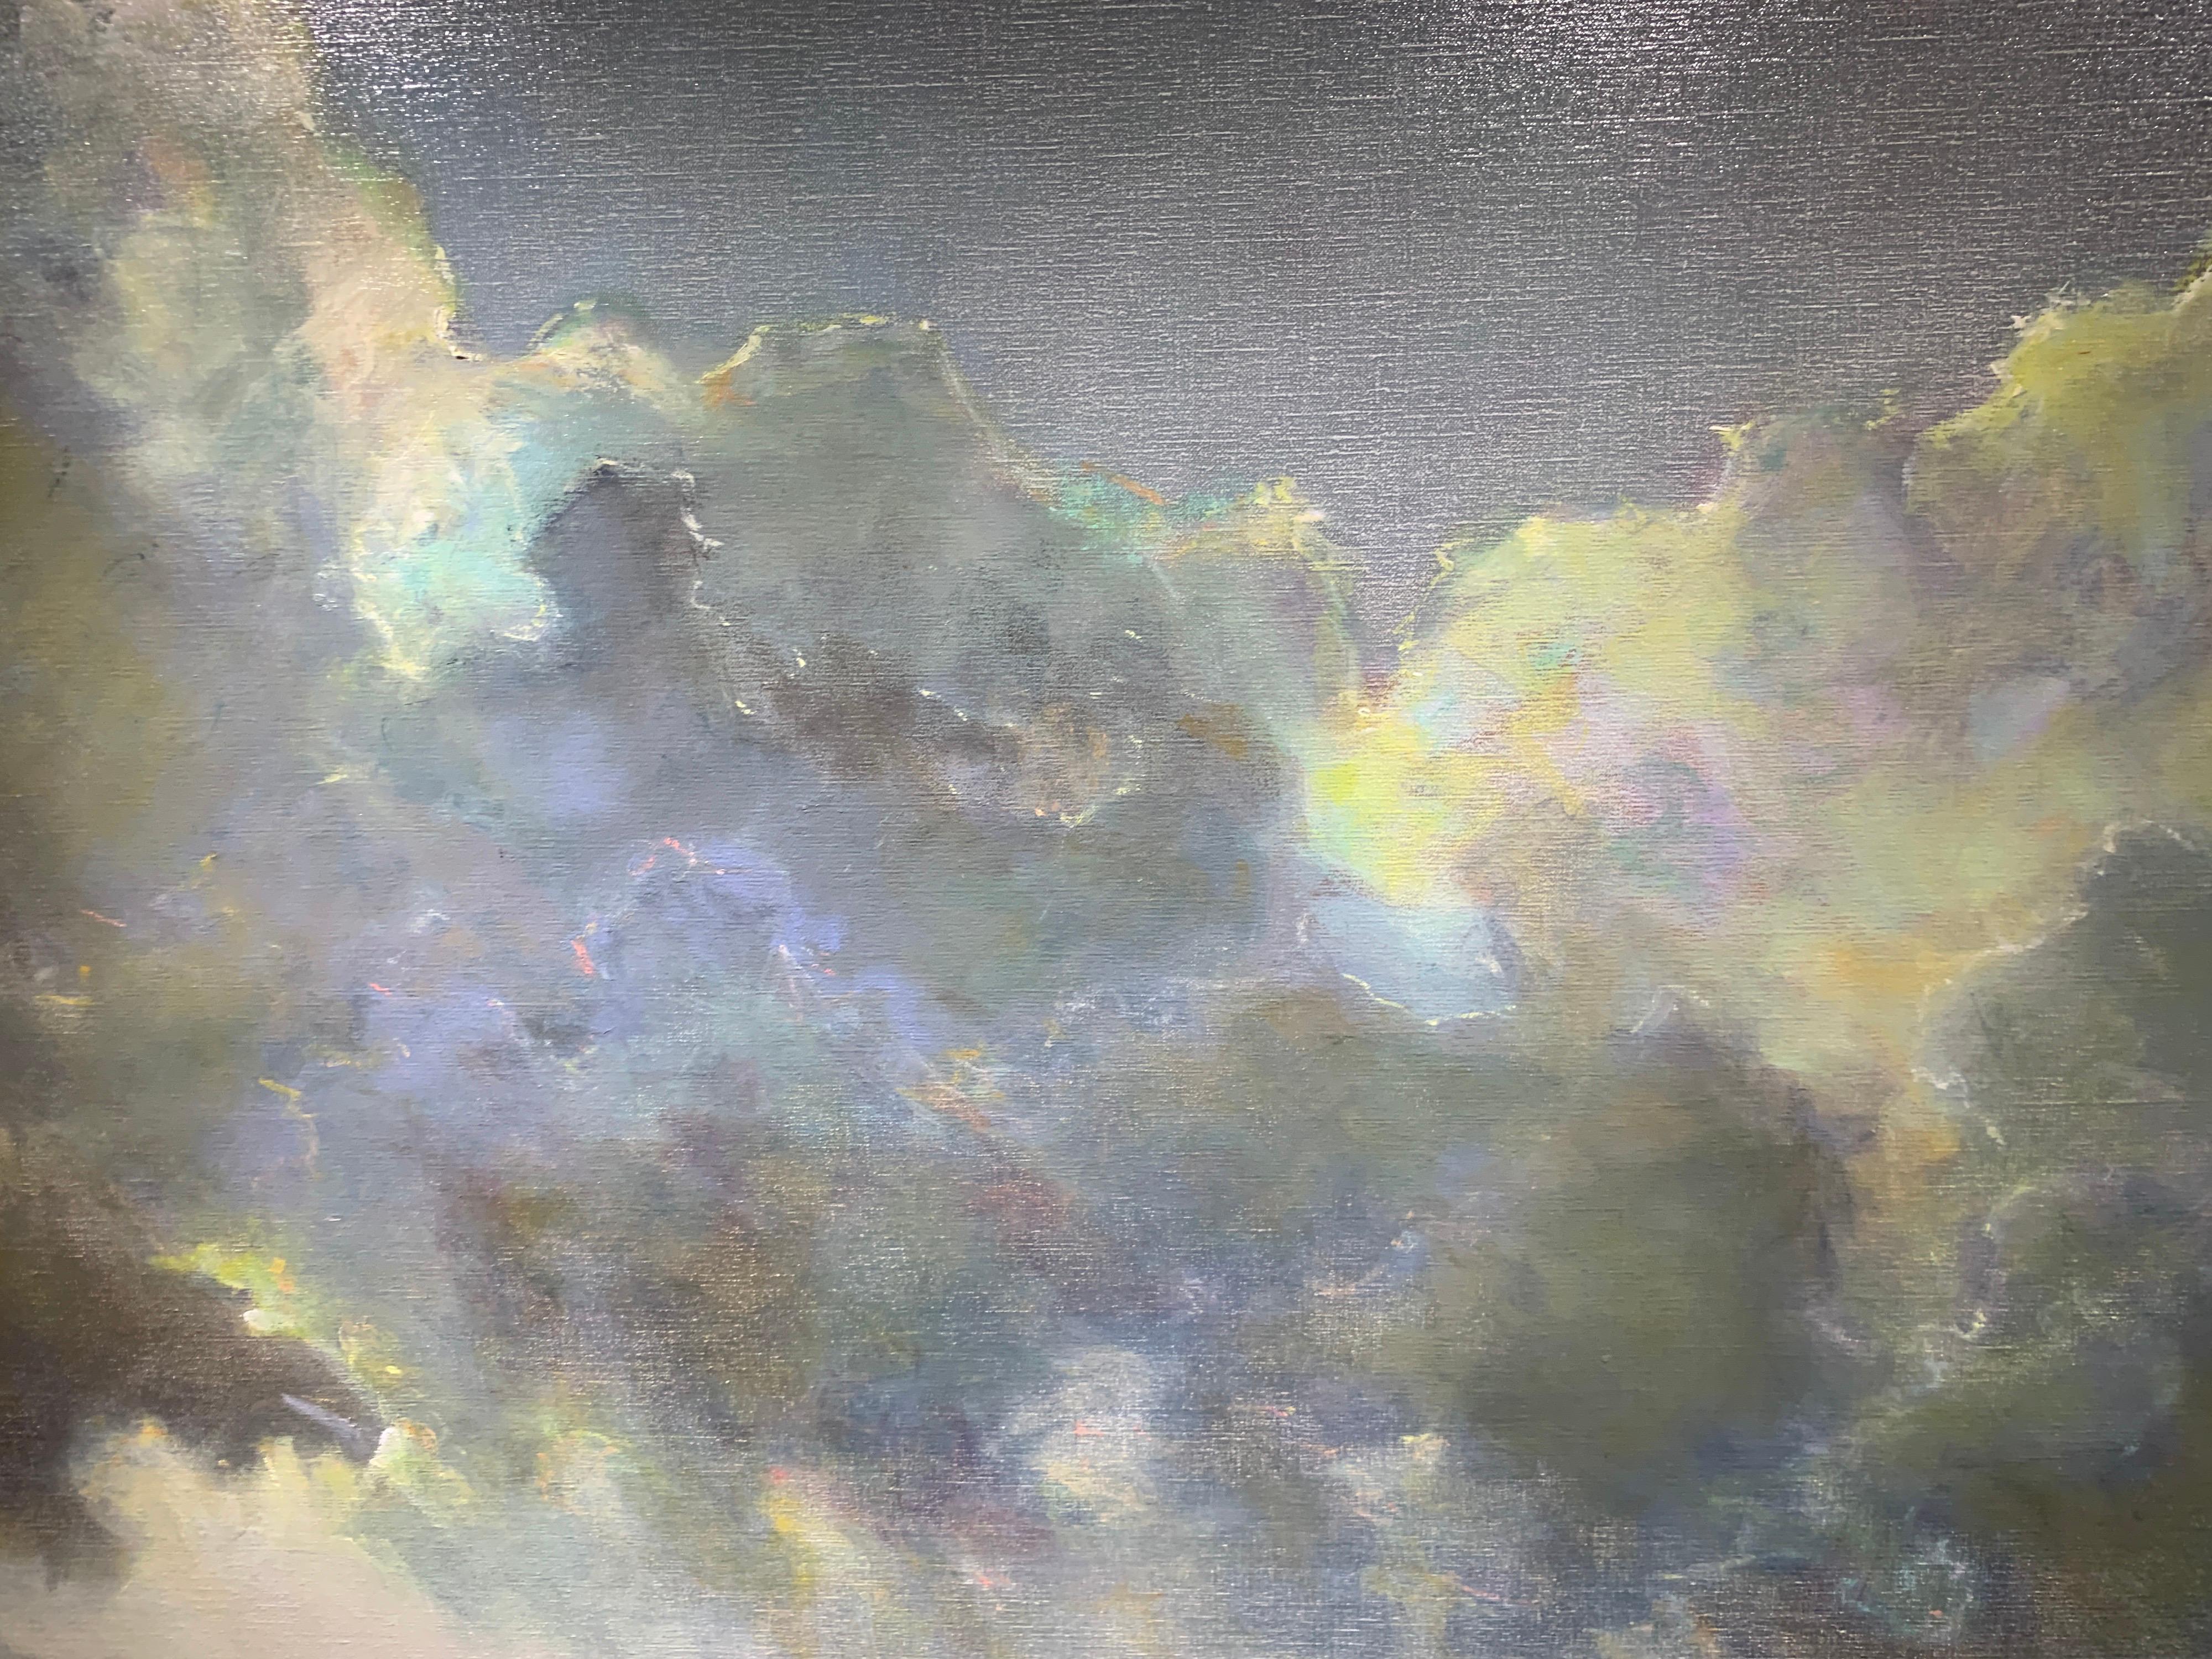 Squall Line Julie Houck, Oil on Linen Post-Impressionist Painting 3